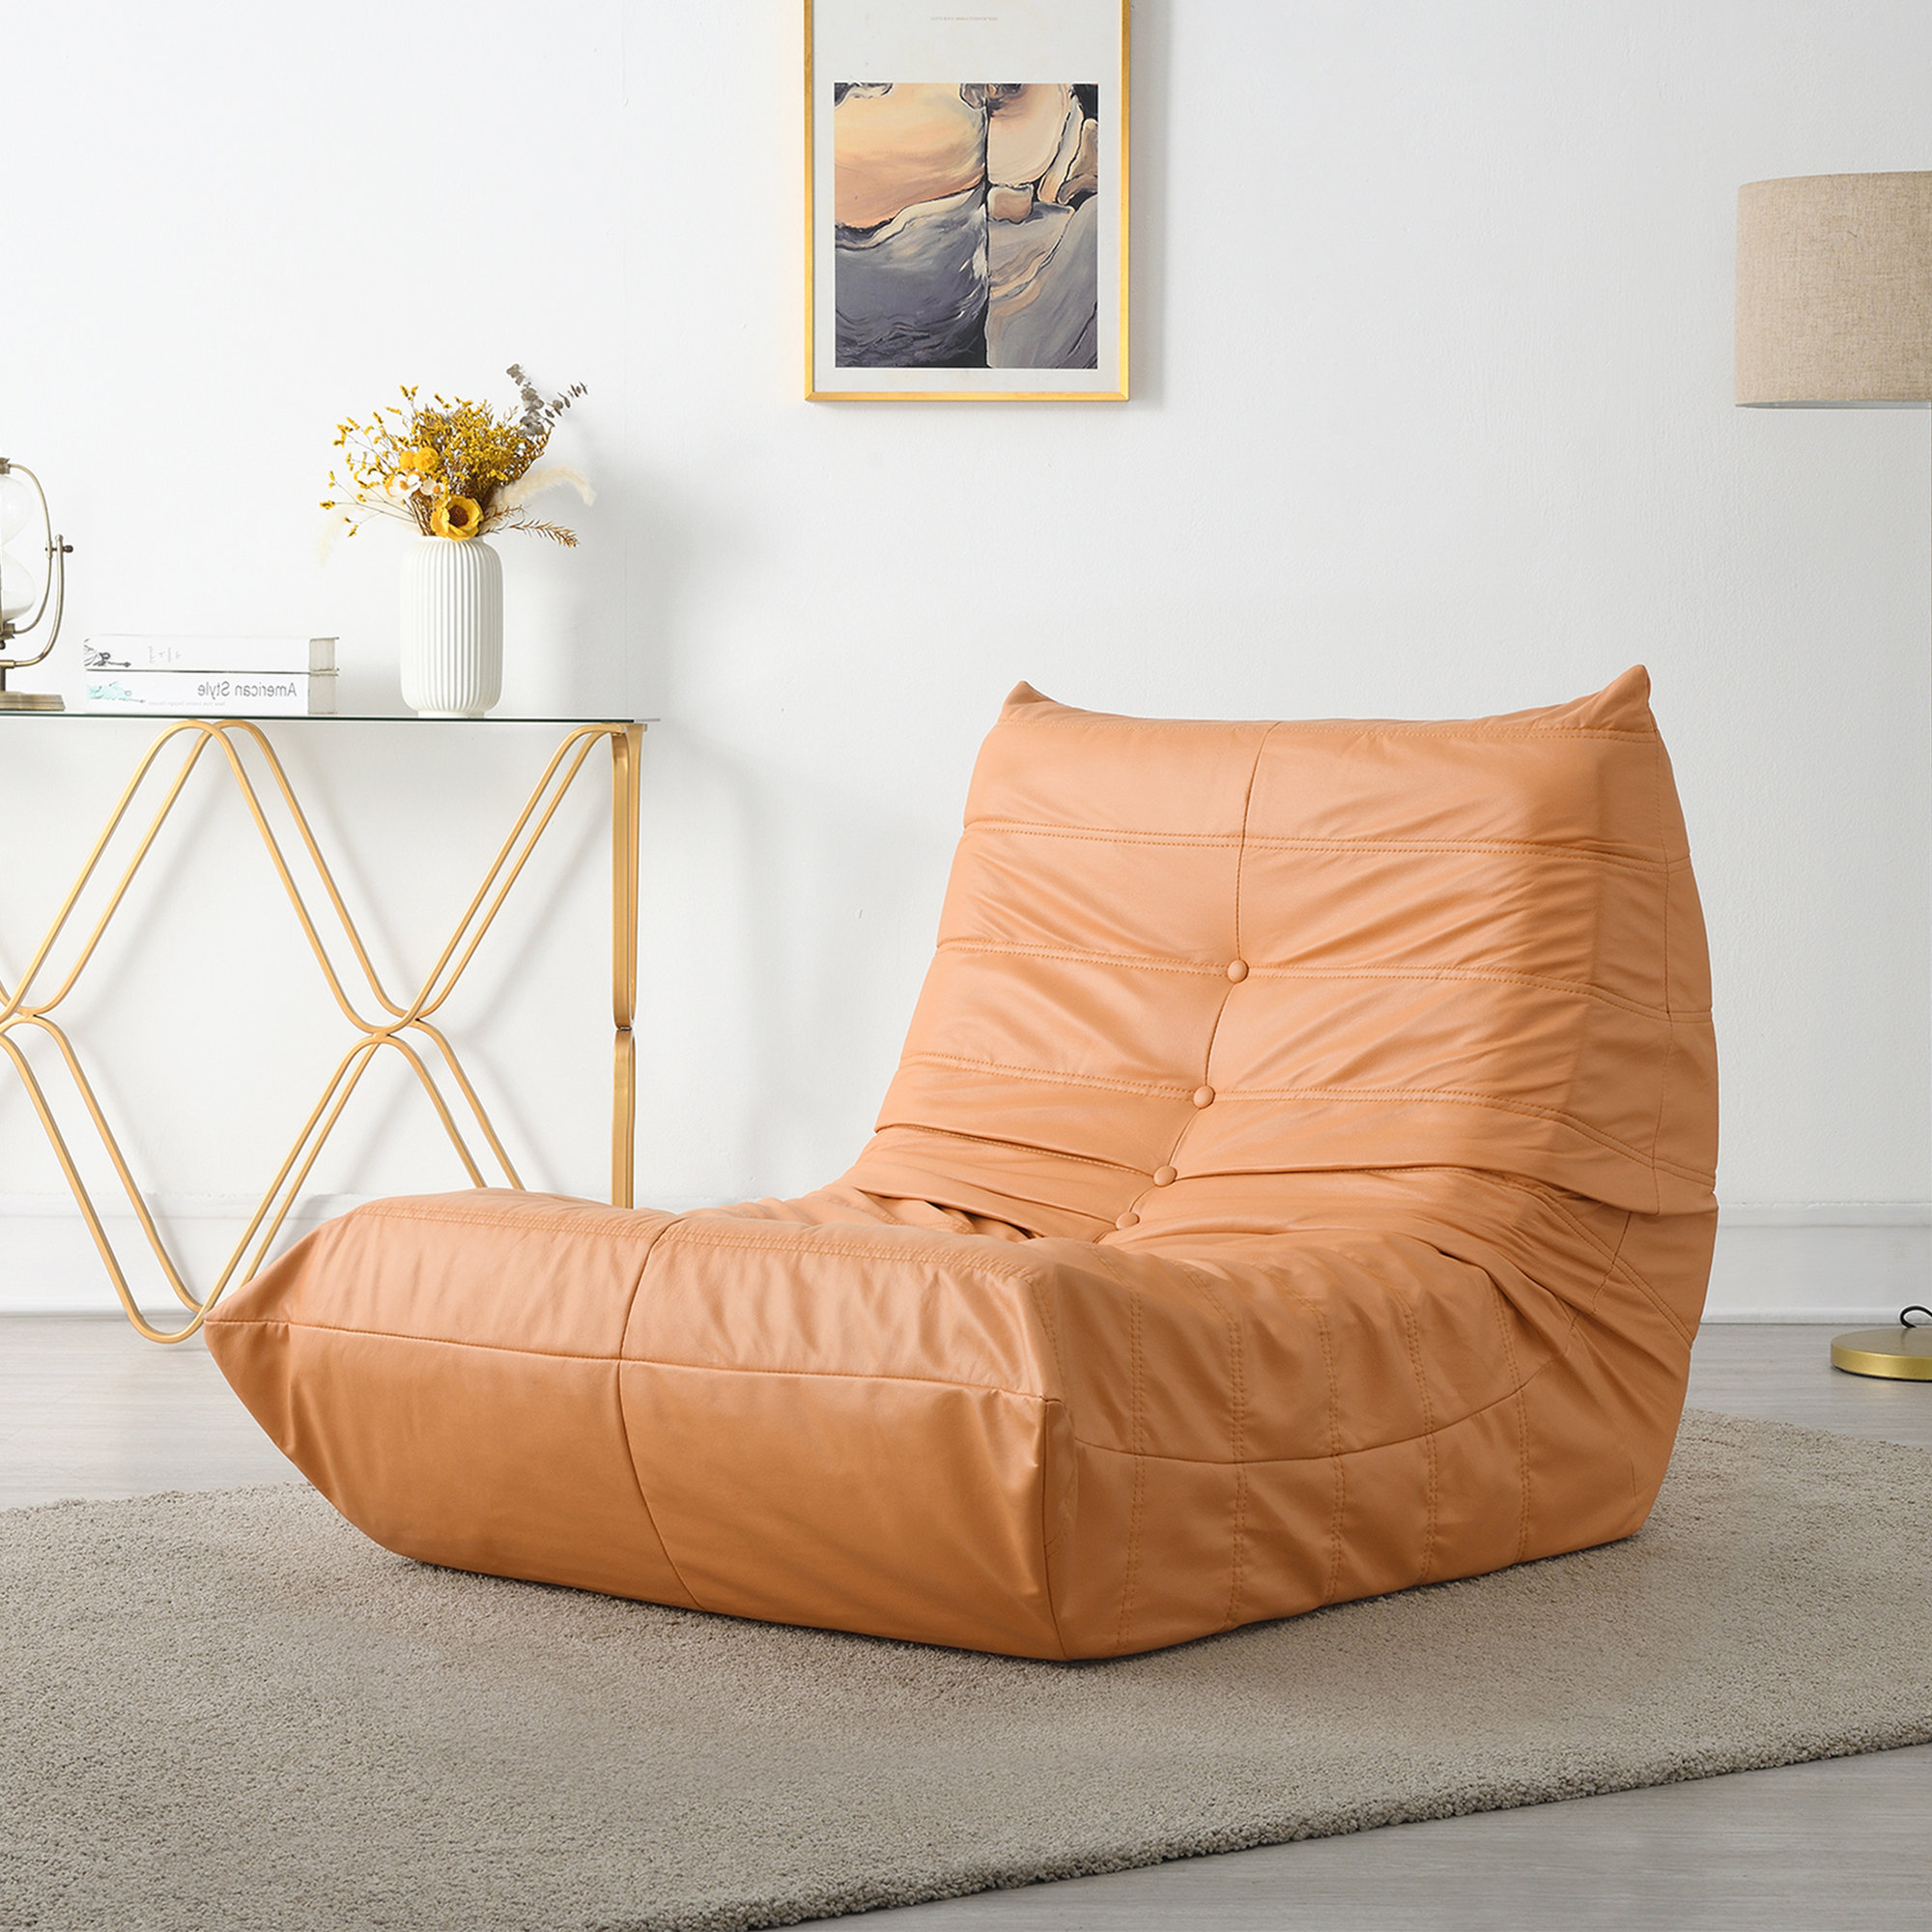 Pouf Footstool - Faux Leather | CordaRoy's Convertible Bean Bags